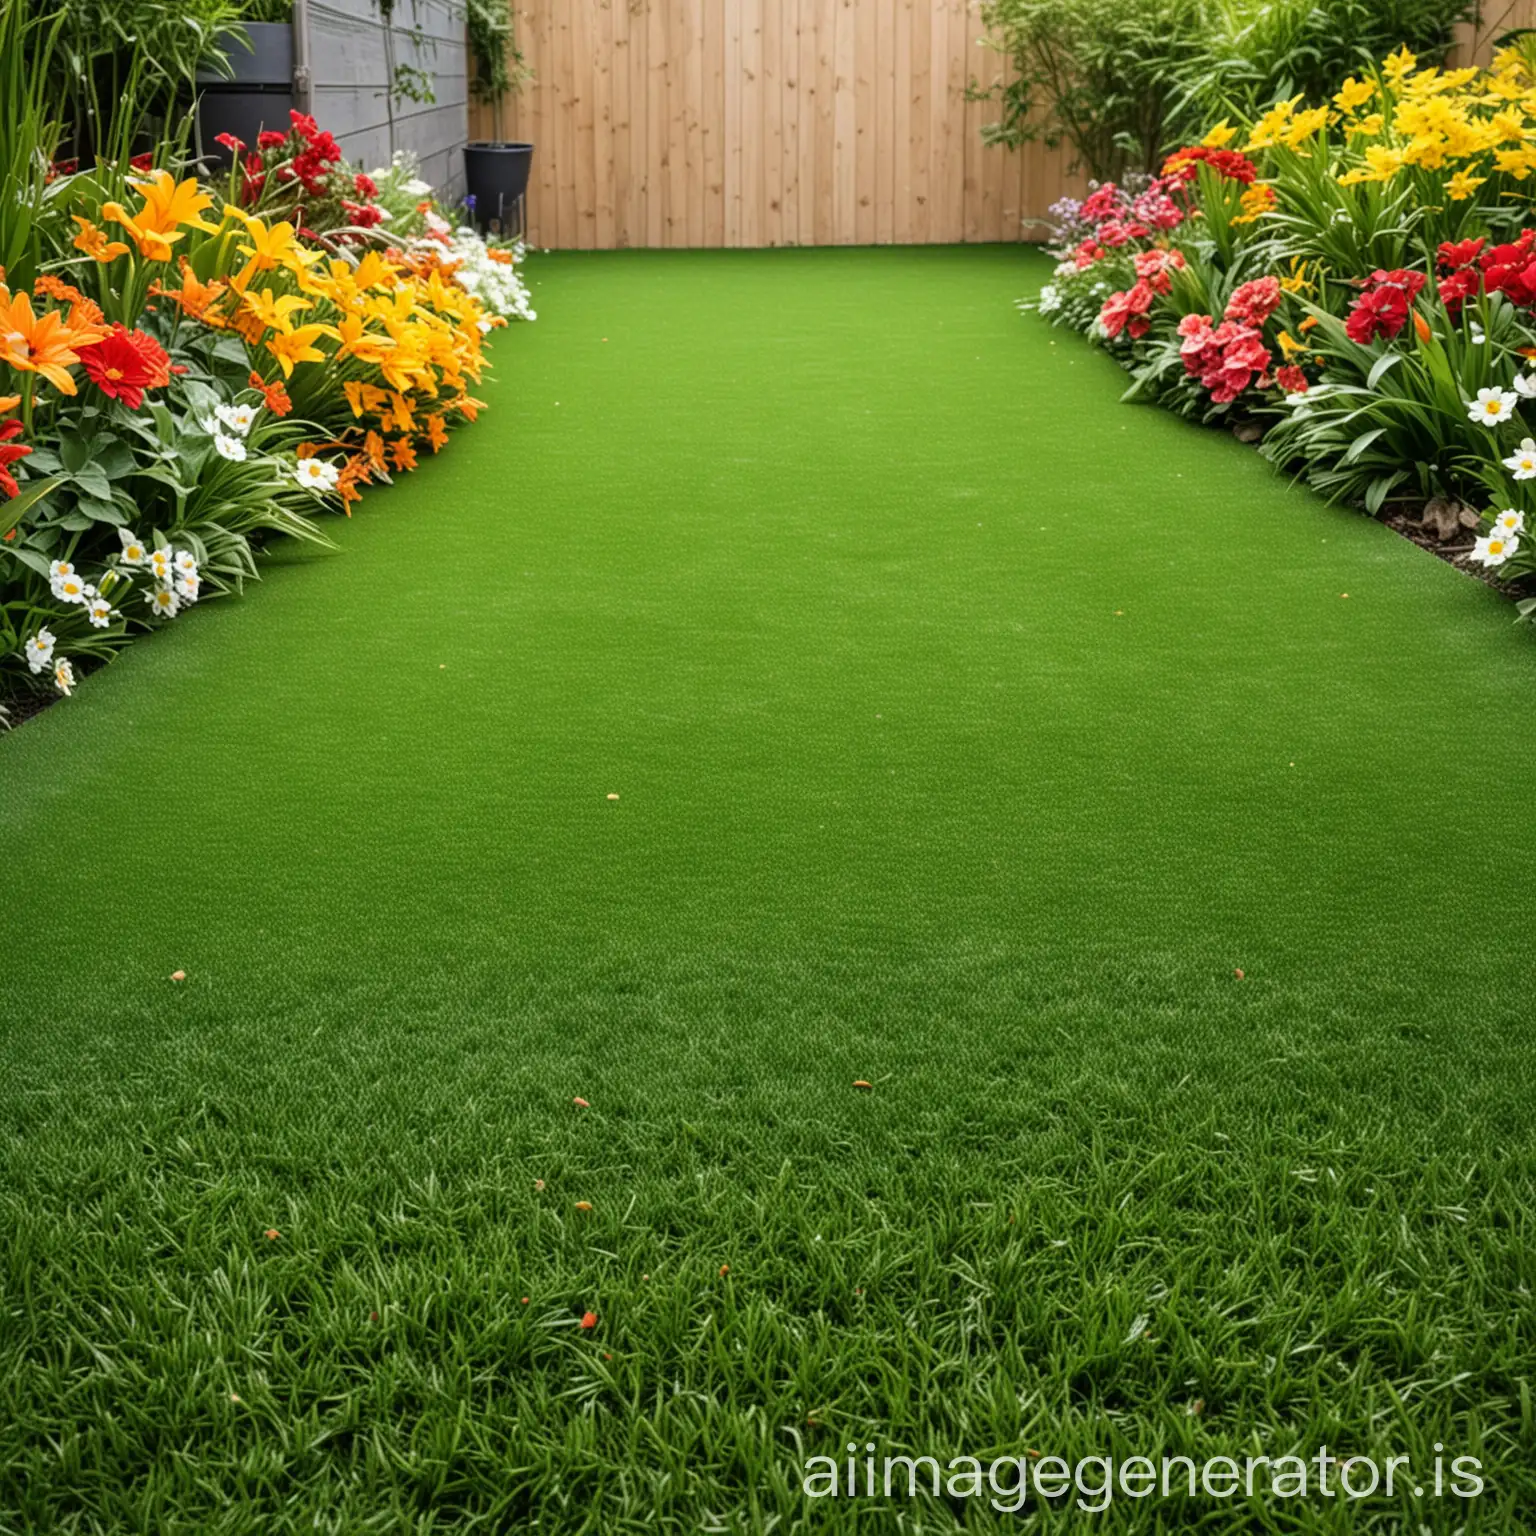 Artificial-Grass-Backyard-with-Minimal-Flowers-Copy-Space-for-Text-or-Design